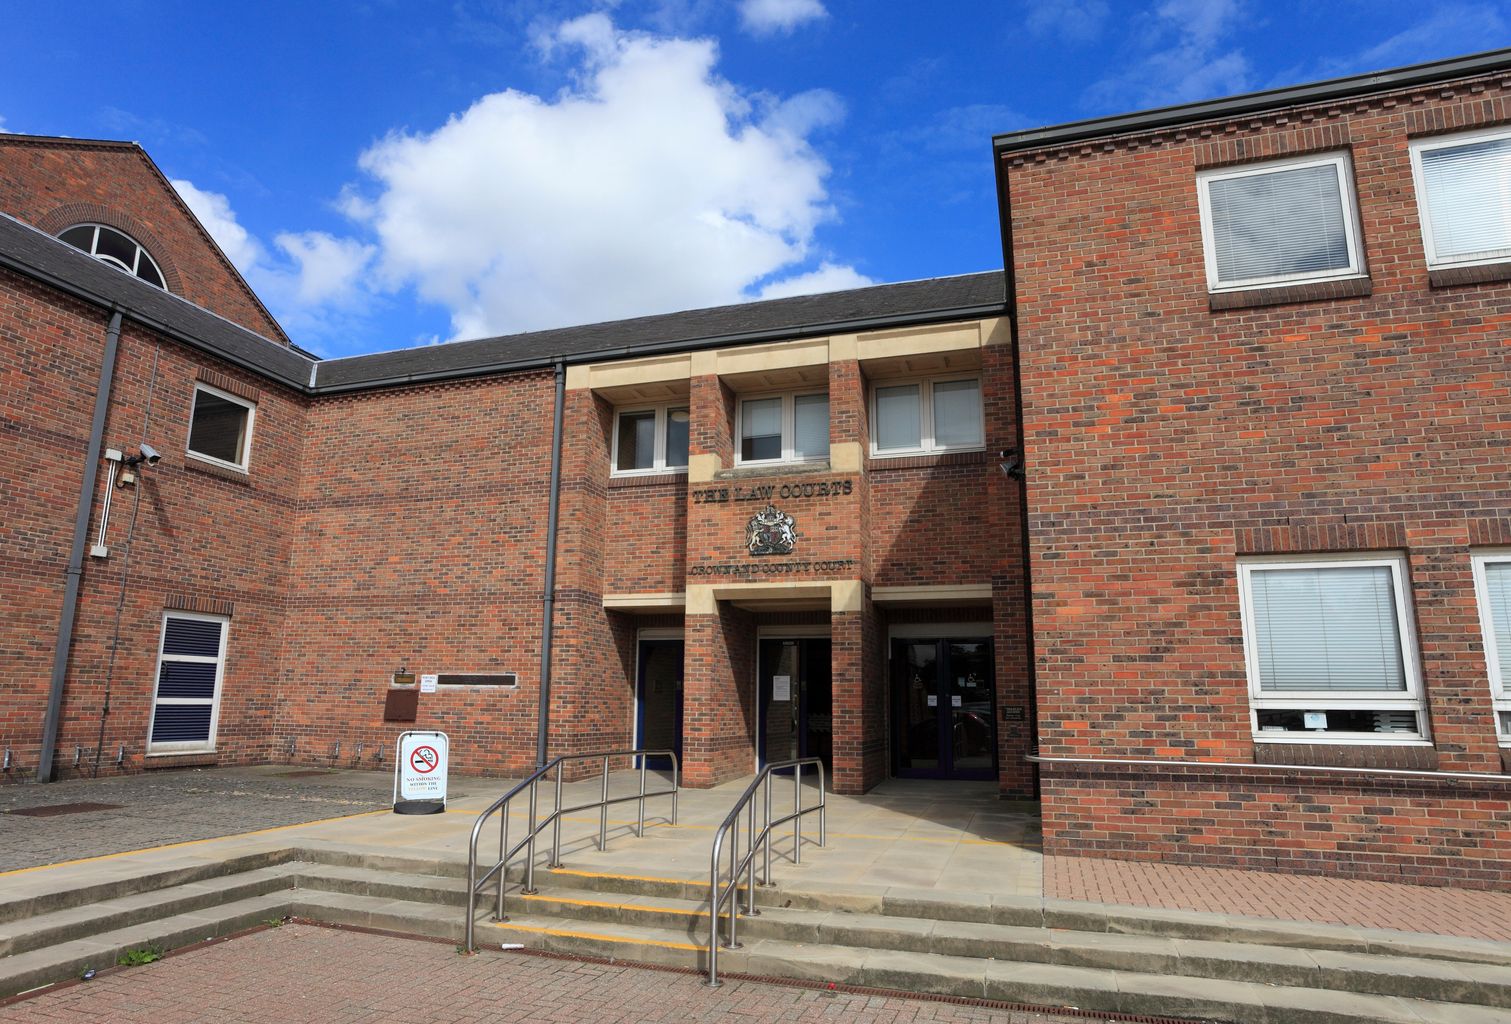 Man appears in court over making indecent images of children in Norfolk